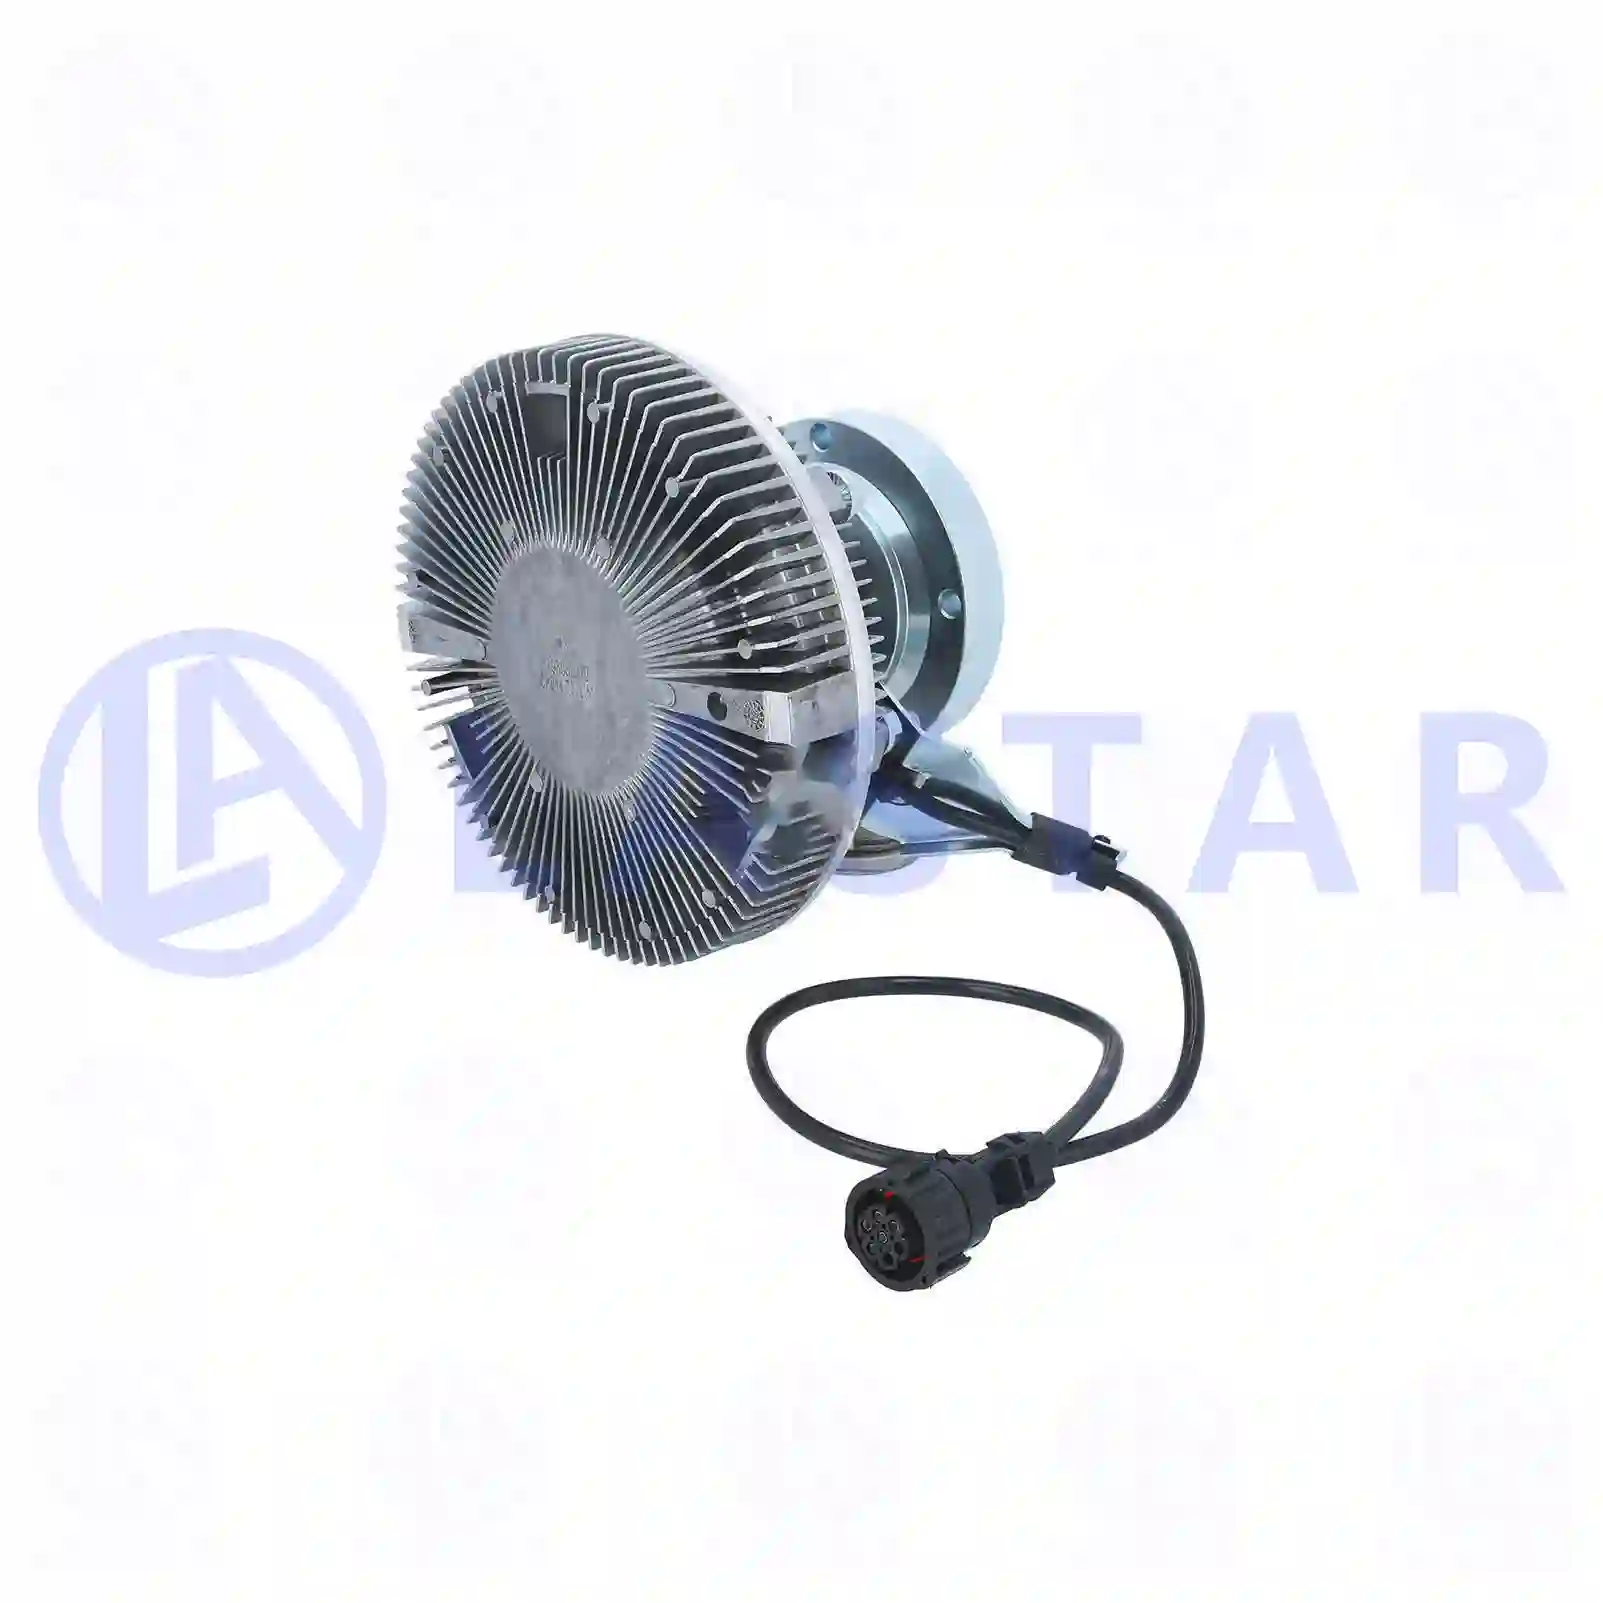 Fan clutch, 77709424, 20450240S, ZG00378-0008 ||  77709424 Lastar Spare Part | Truck Spare Parts, Auotomotive Spare Parts Fan clutch, 77709424, 20450240S, ZG00378-0008 ||  77709424 Lastar Spare Part | Truck Spare Parts, Auotomotive Spare Parts